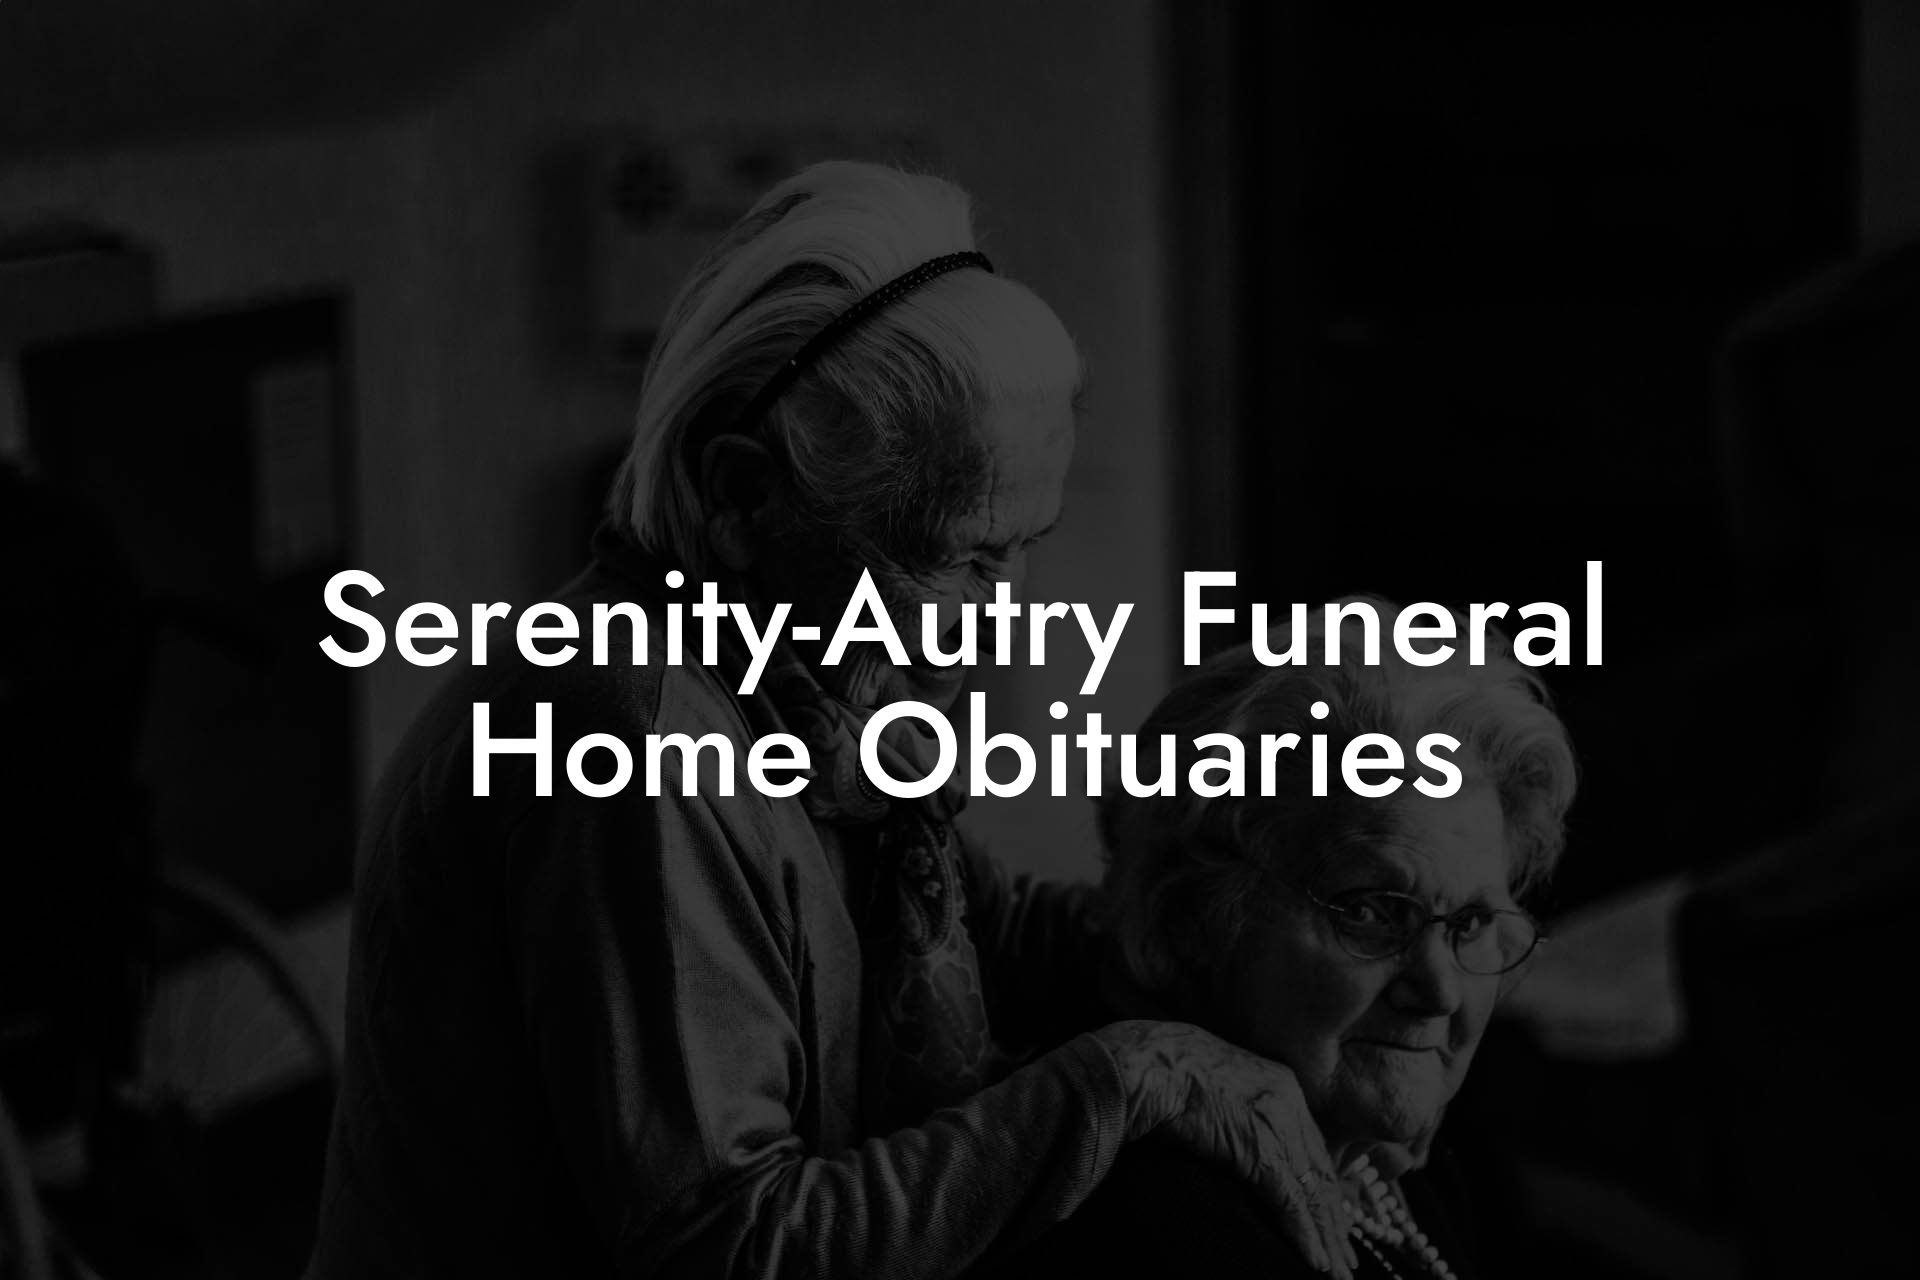 Serenity-Autry Funeral Home Obituaries